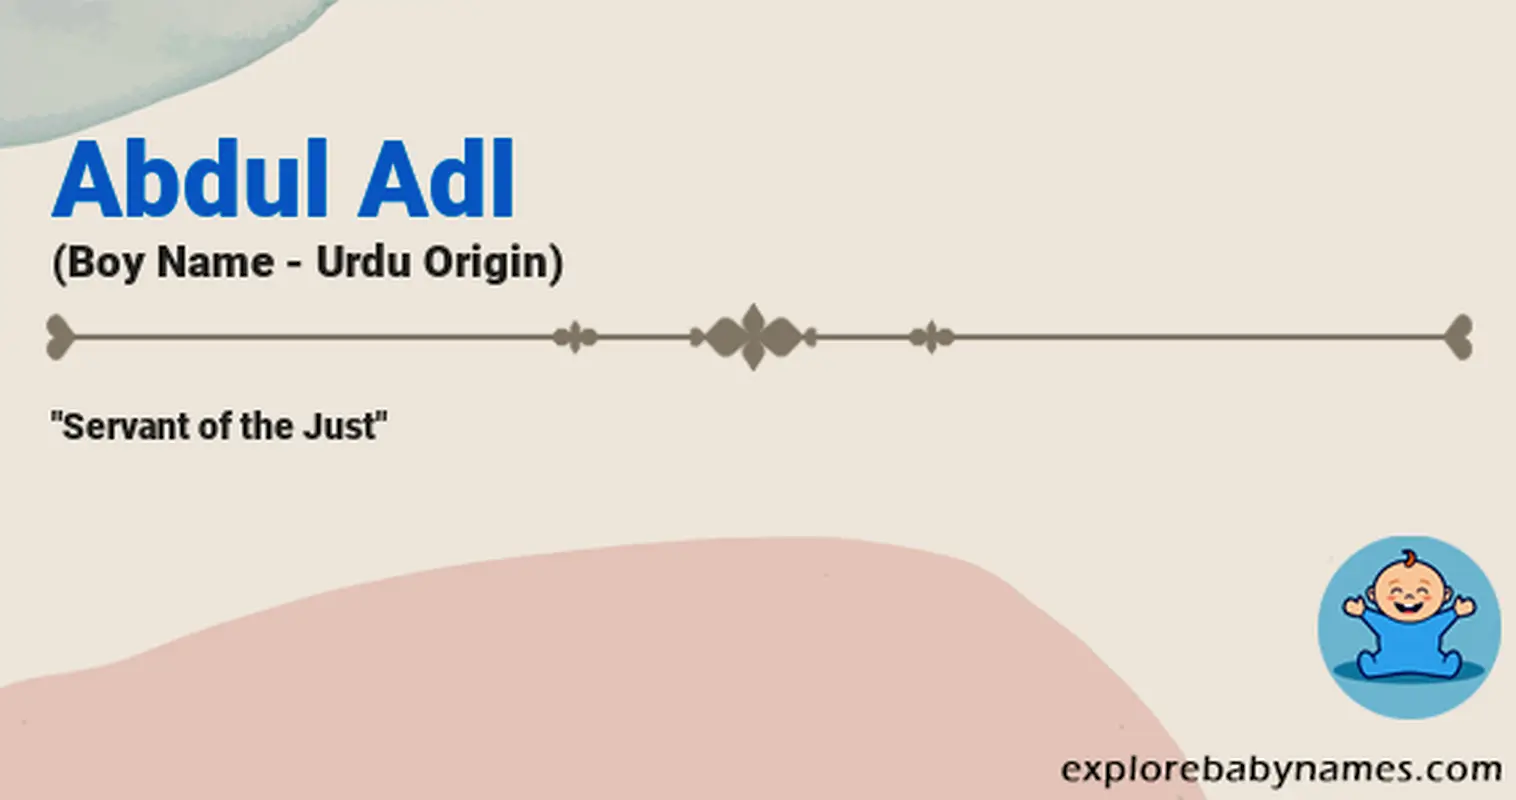 Meaning of Abdul Adl